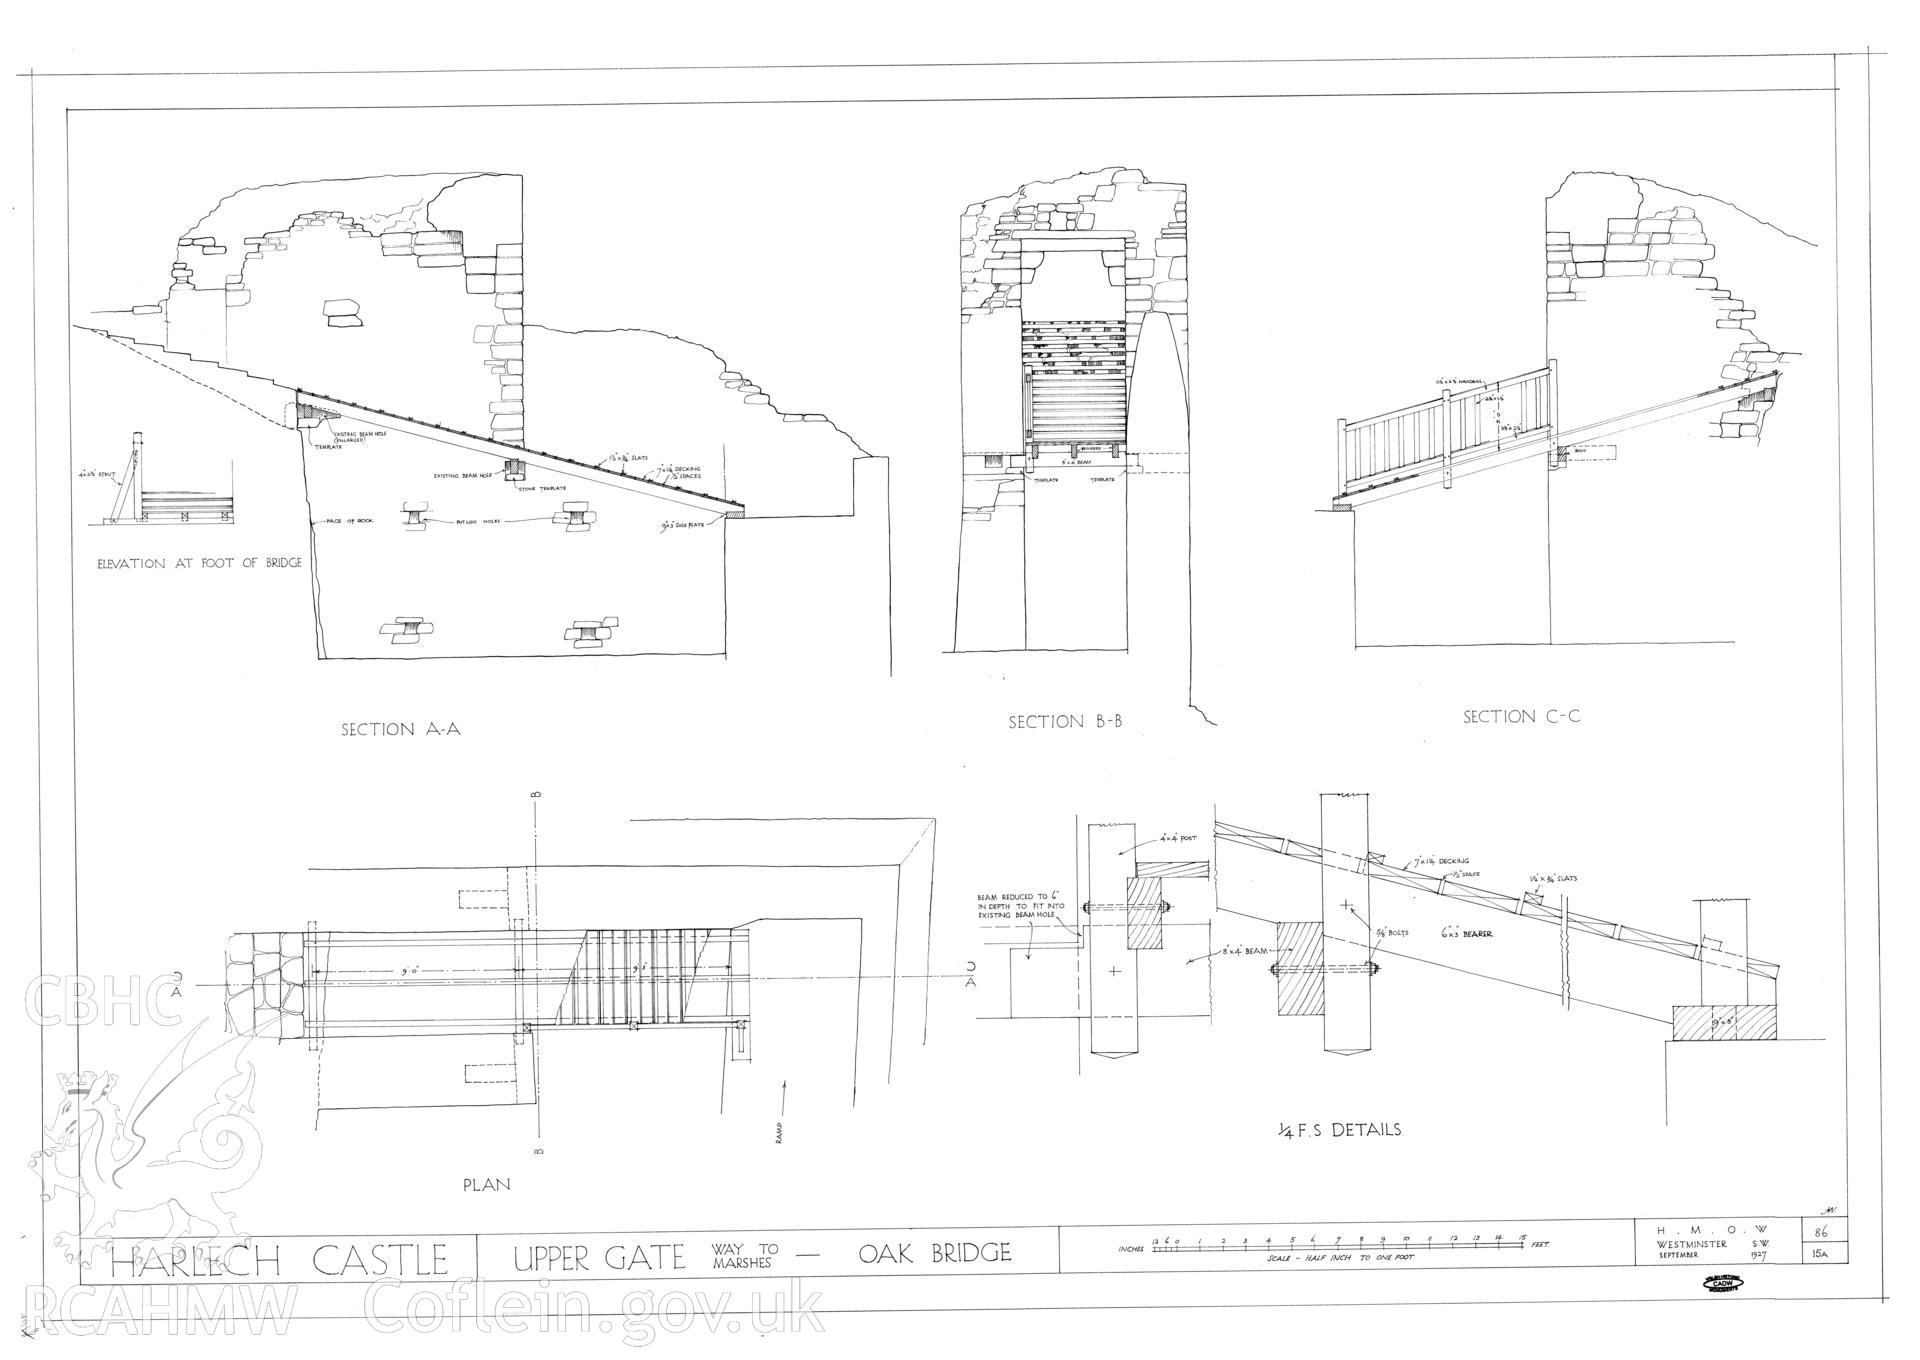 Cadw guardianship monument drawing of Harlech Castle. Outer ward, upper gate, bridge. Cadw Ref. No:86/15A. Scale 1:24.